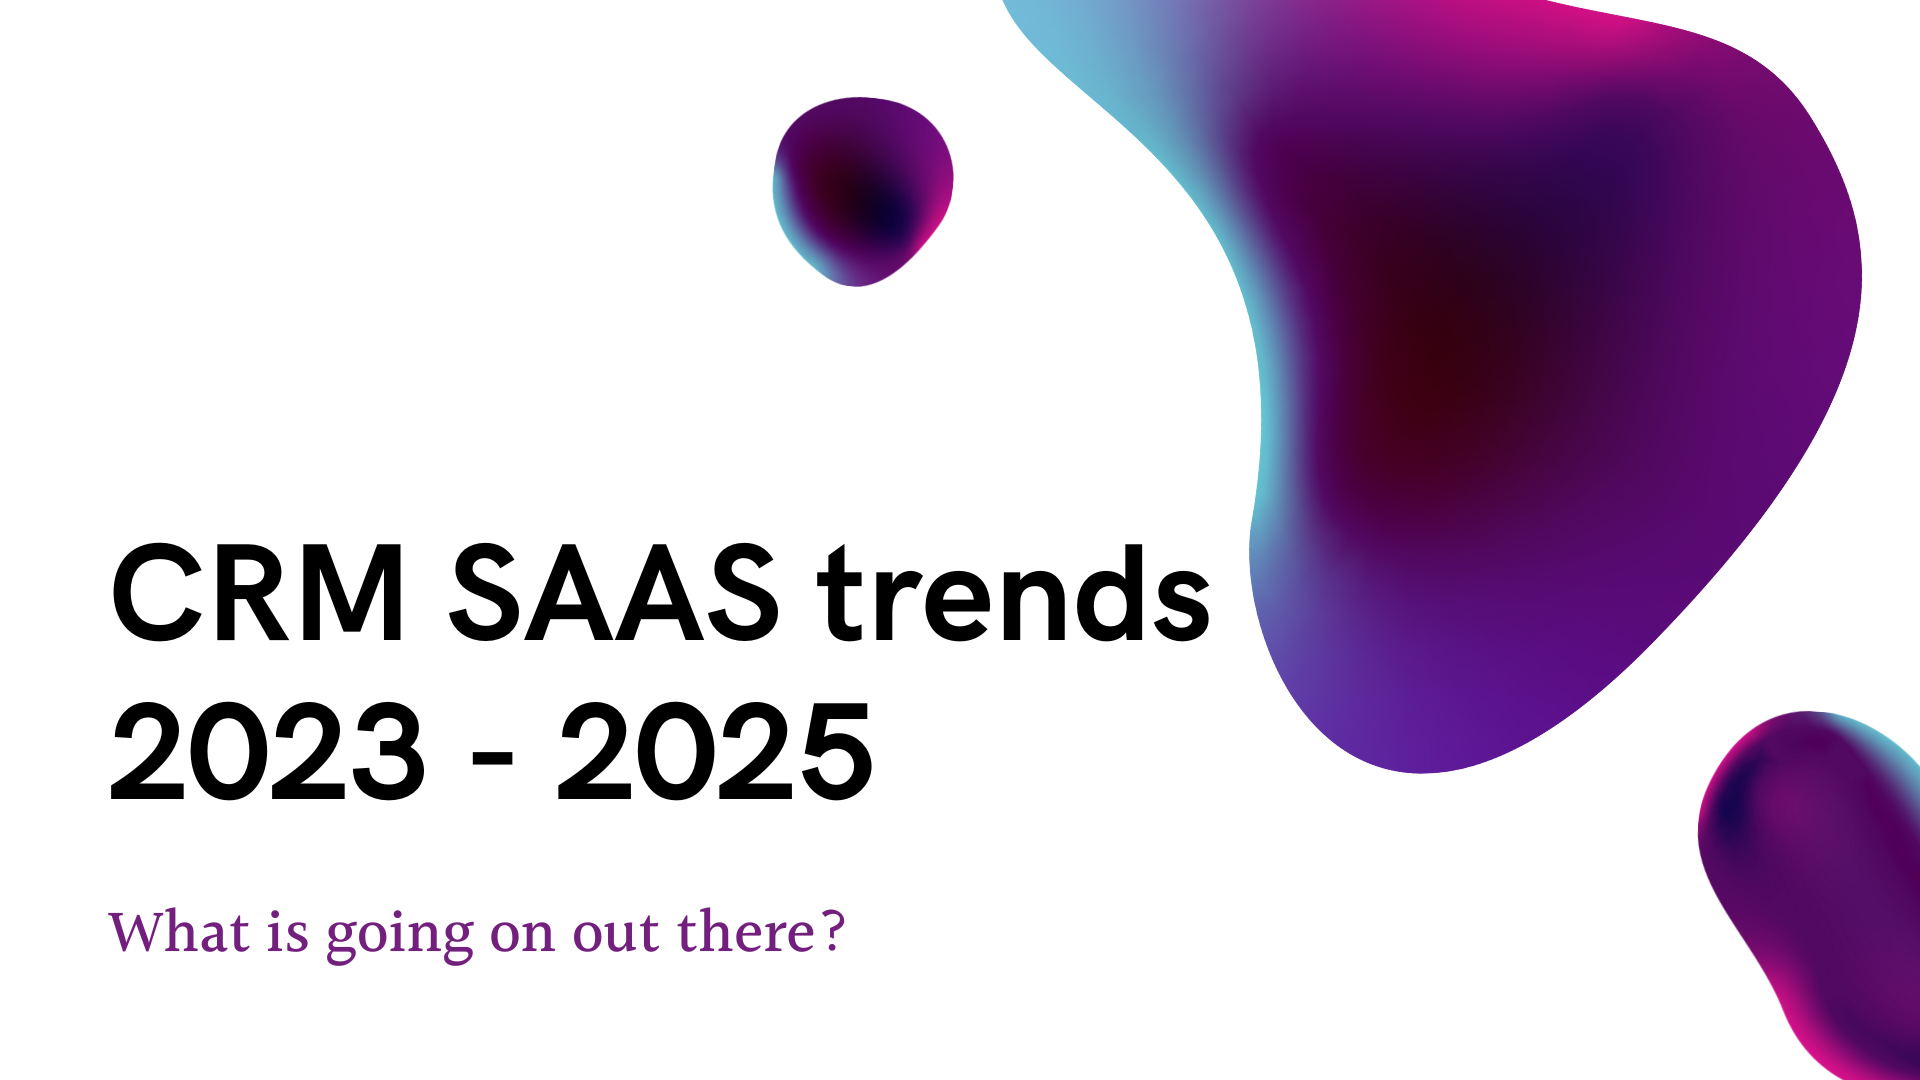 CRM SaaS trends from 2023 to 2025 Kate notes